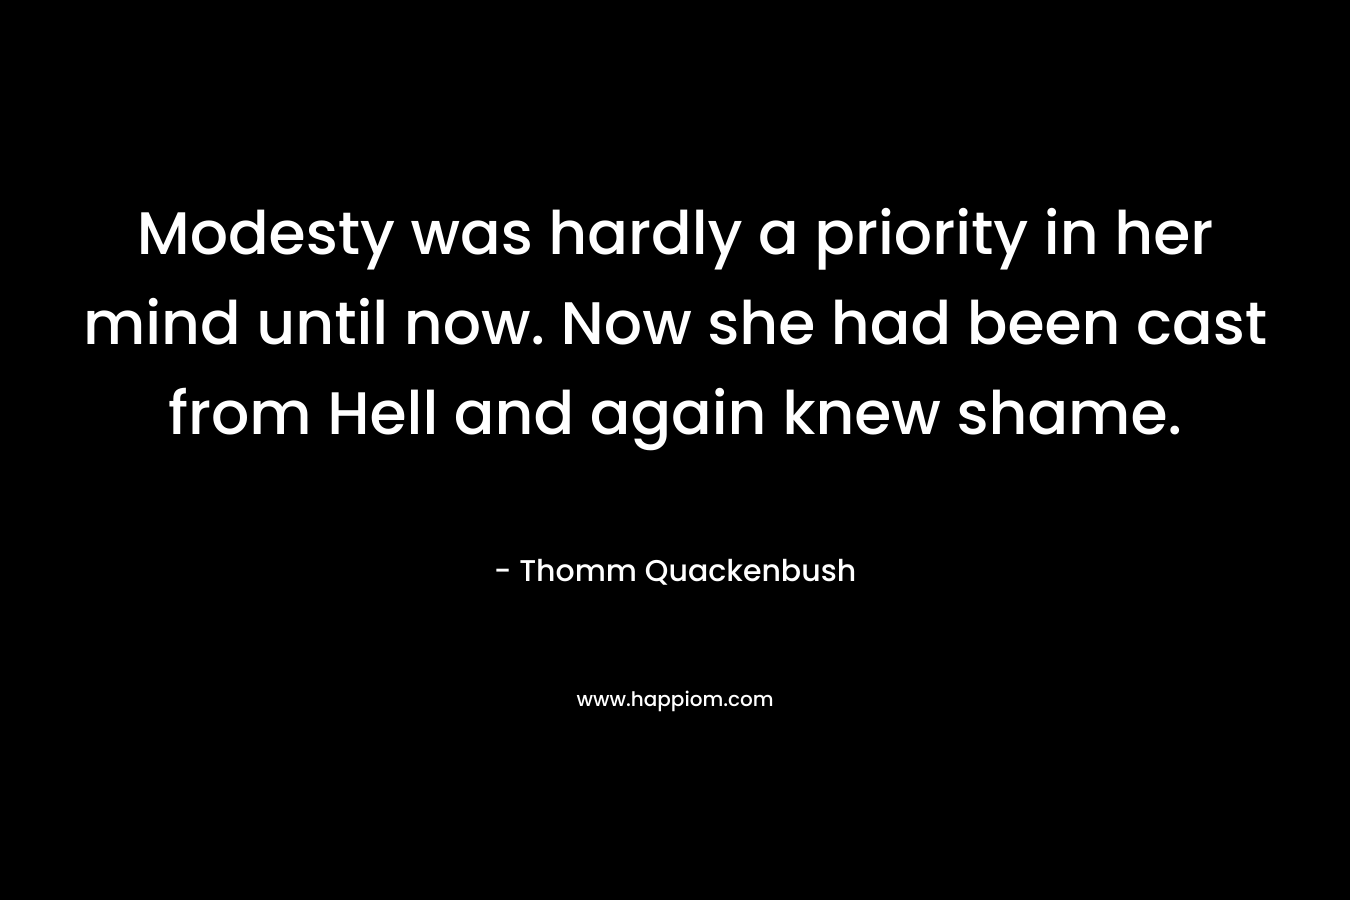 Modesty was hardly a priority in her mind until now. Now she had been cast from Hell and again knew shame. – Thomm Quackenbush